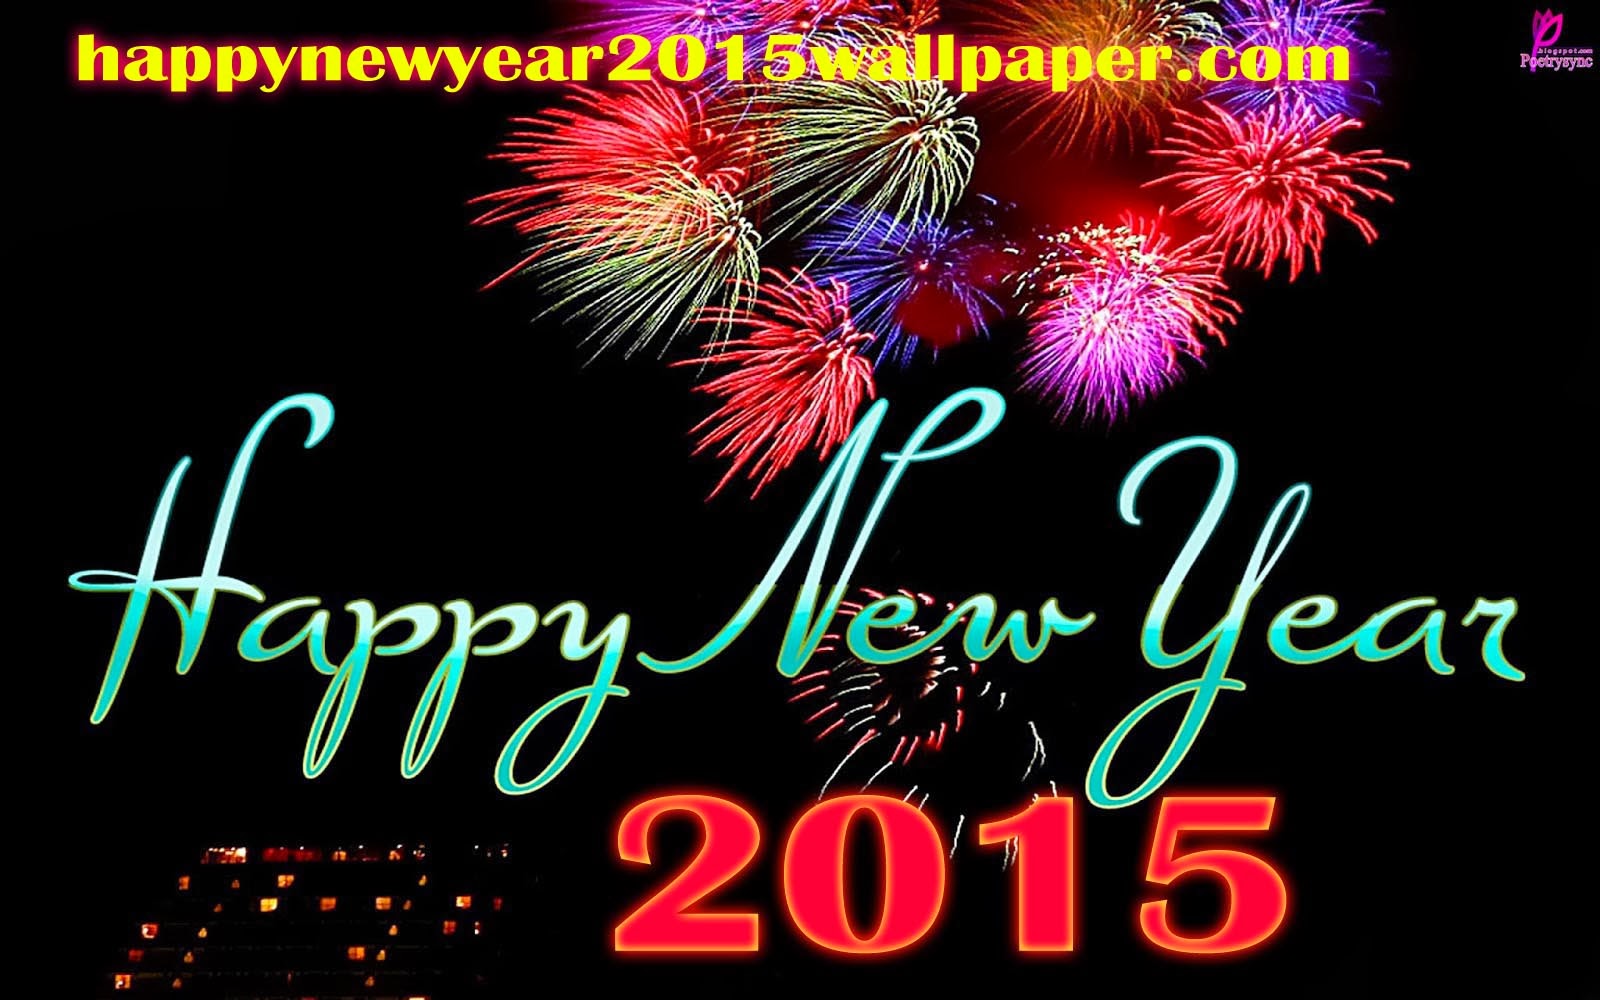 for happy new year 2015 wallpaper new year wishes wallpapers new year 1600x1000